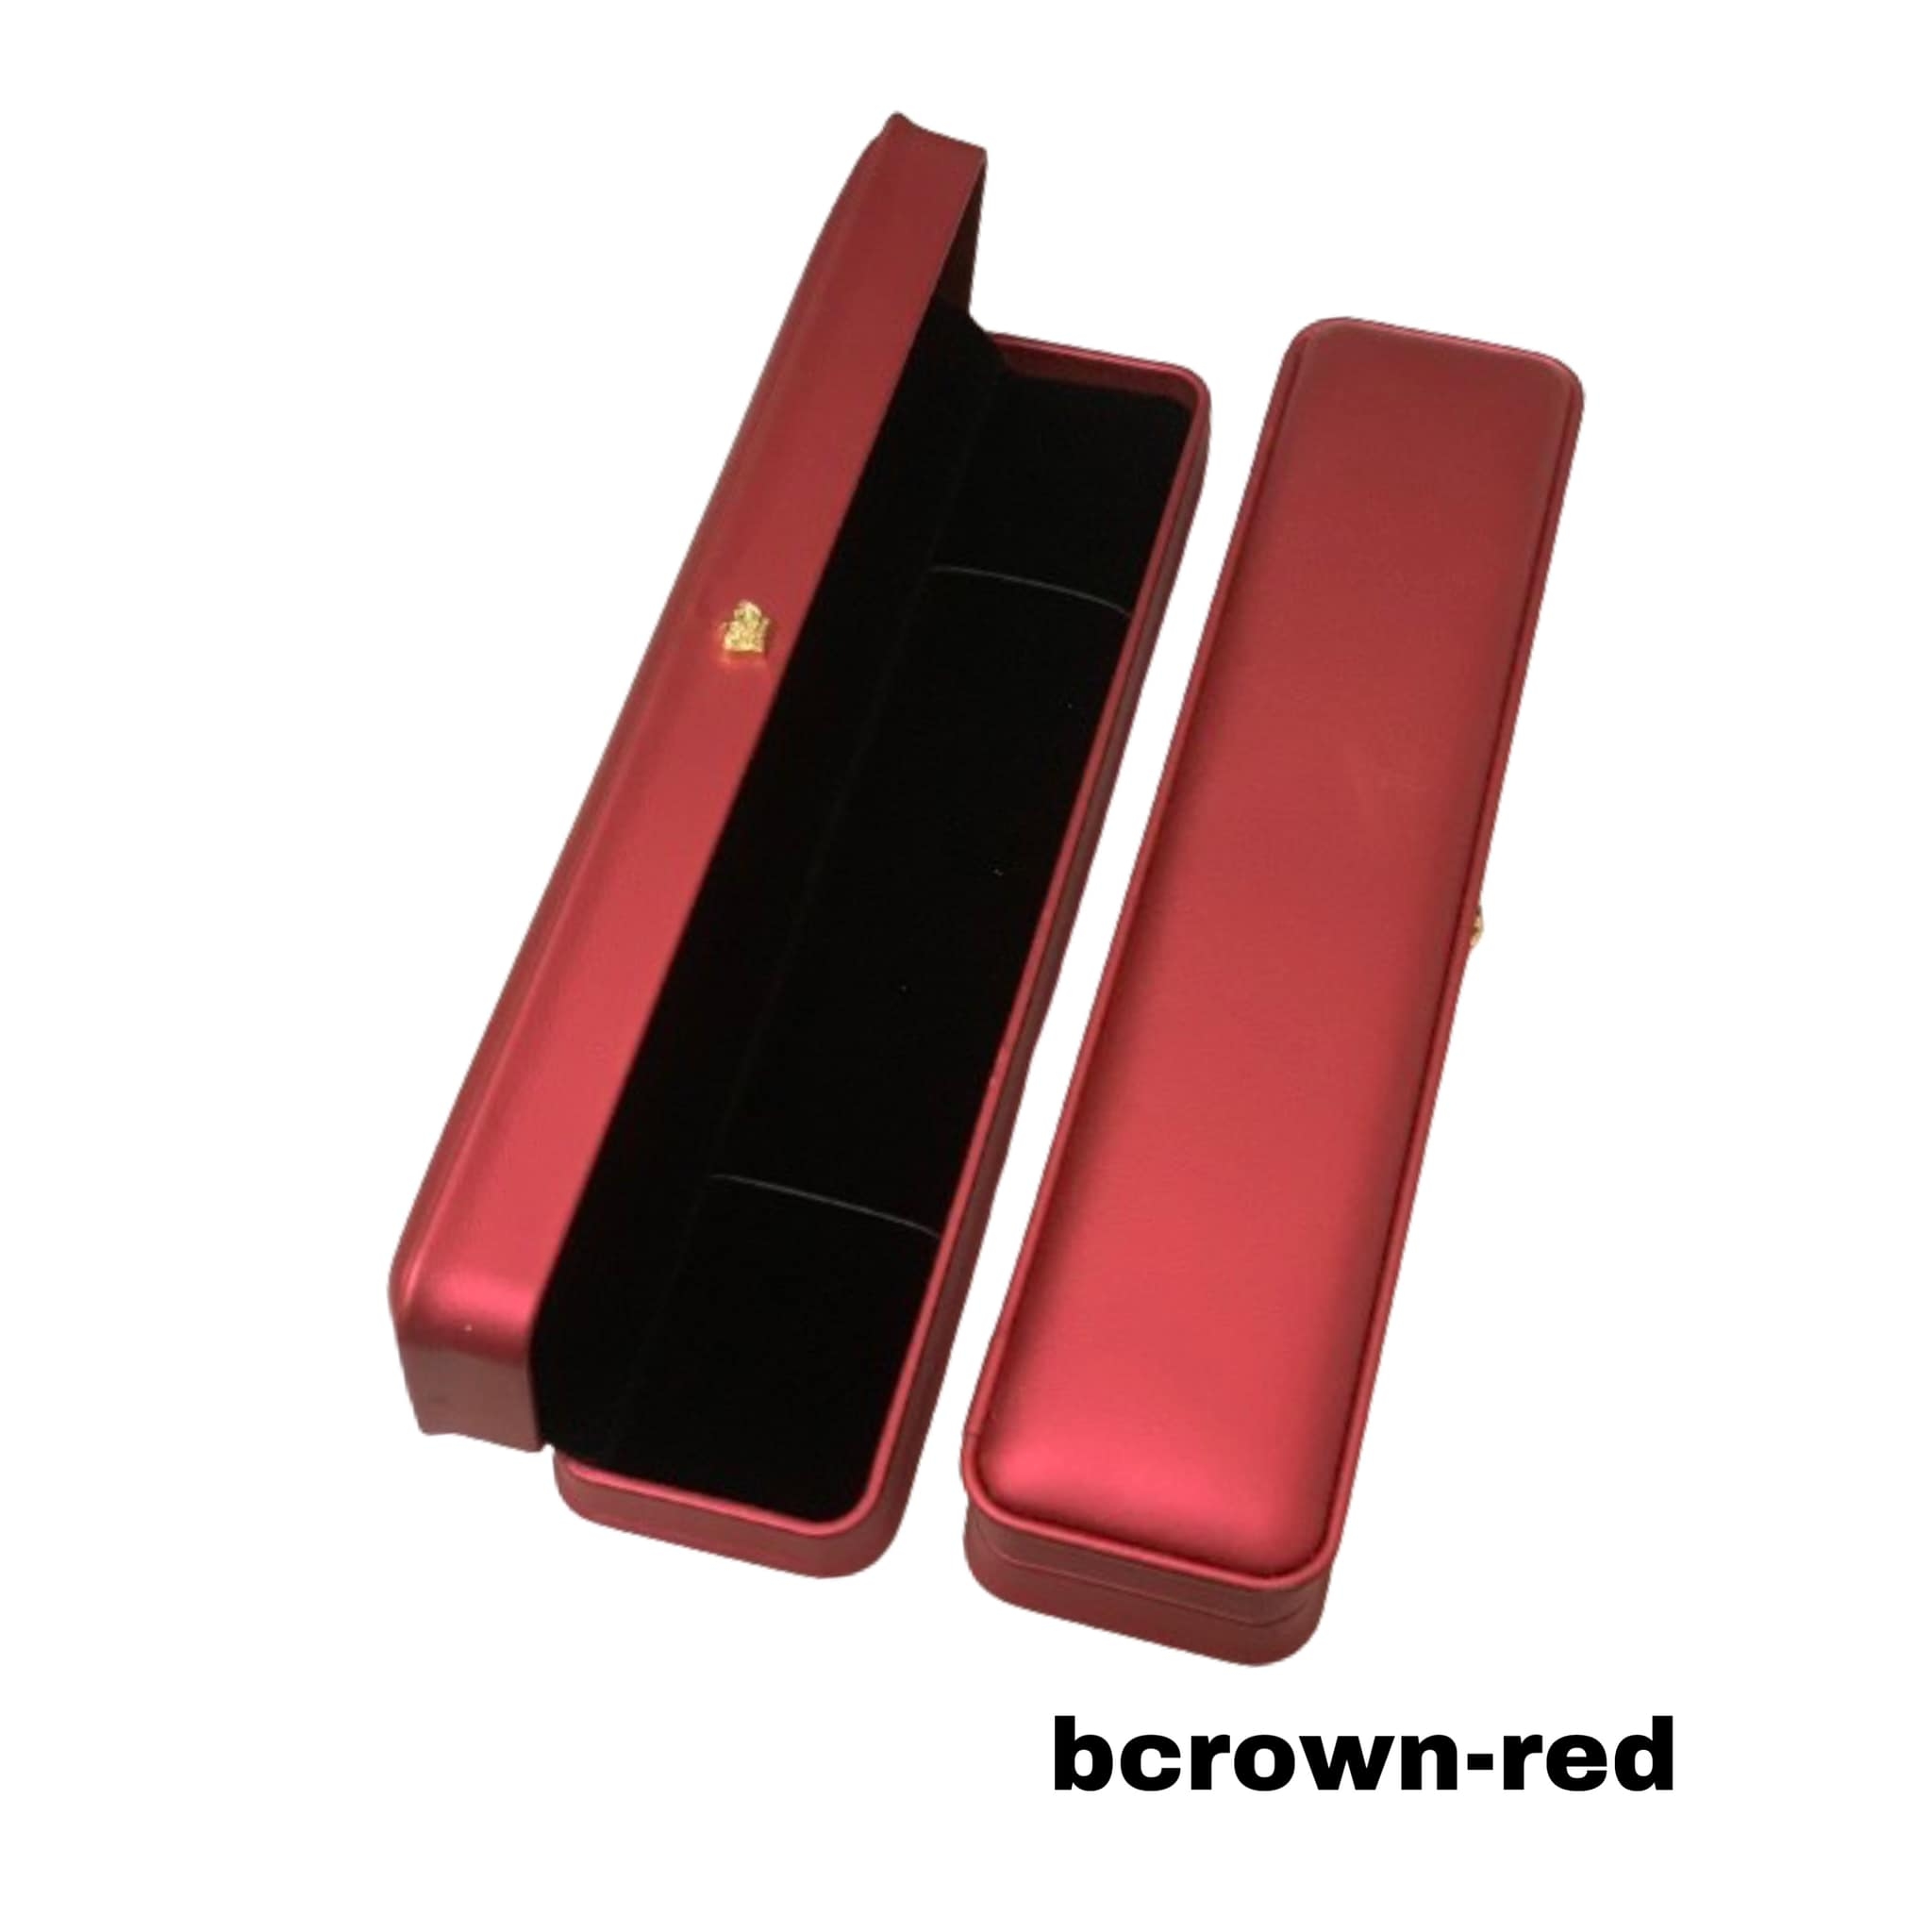 bcrown-red